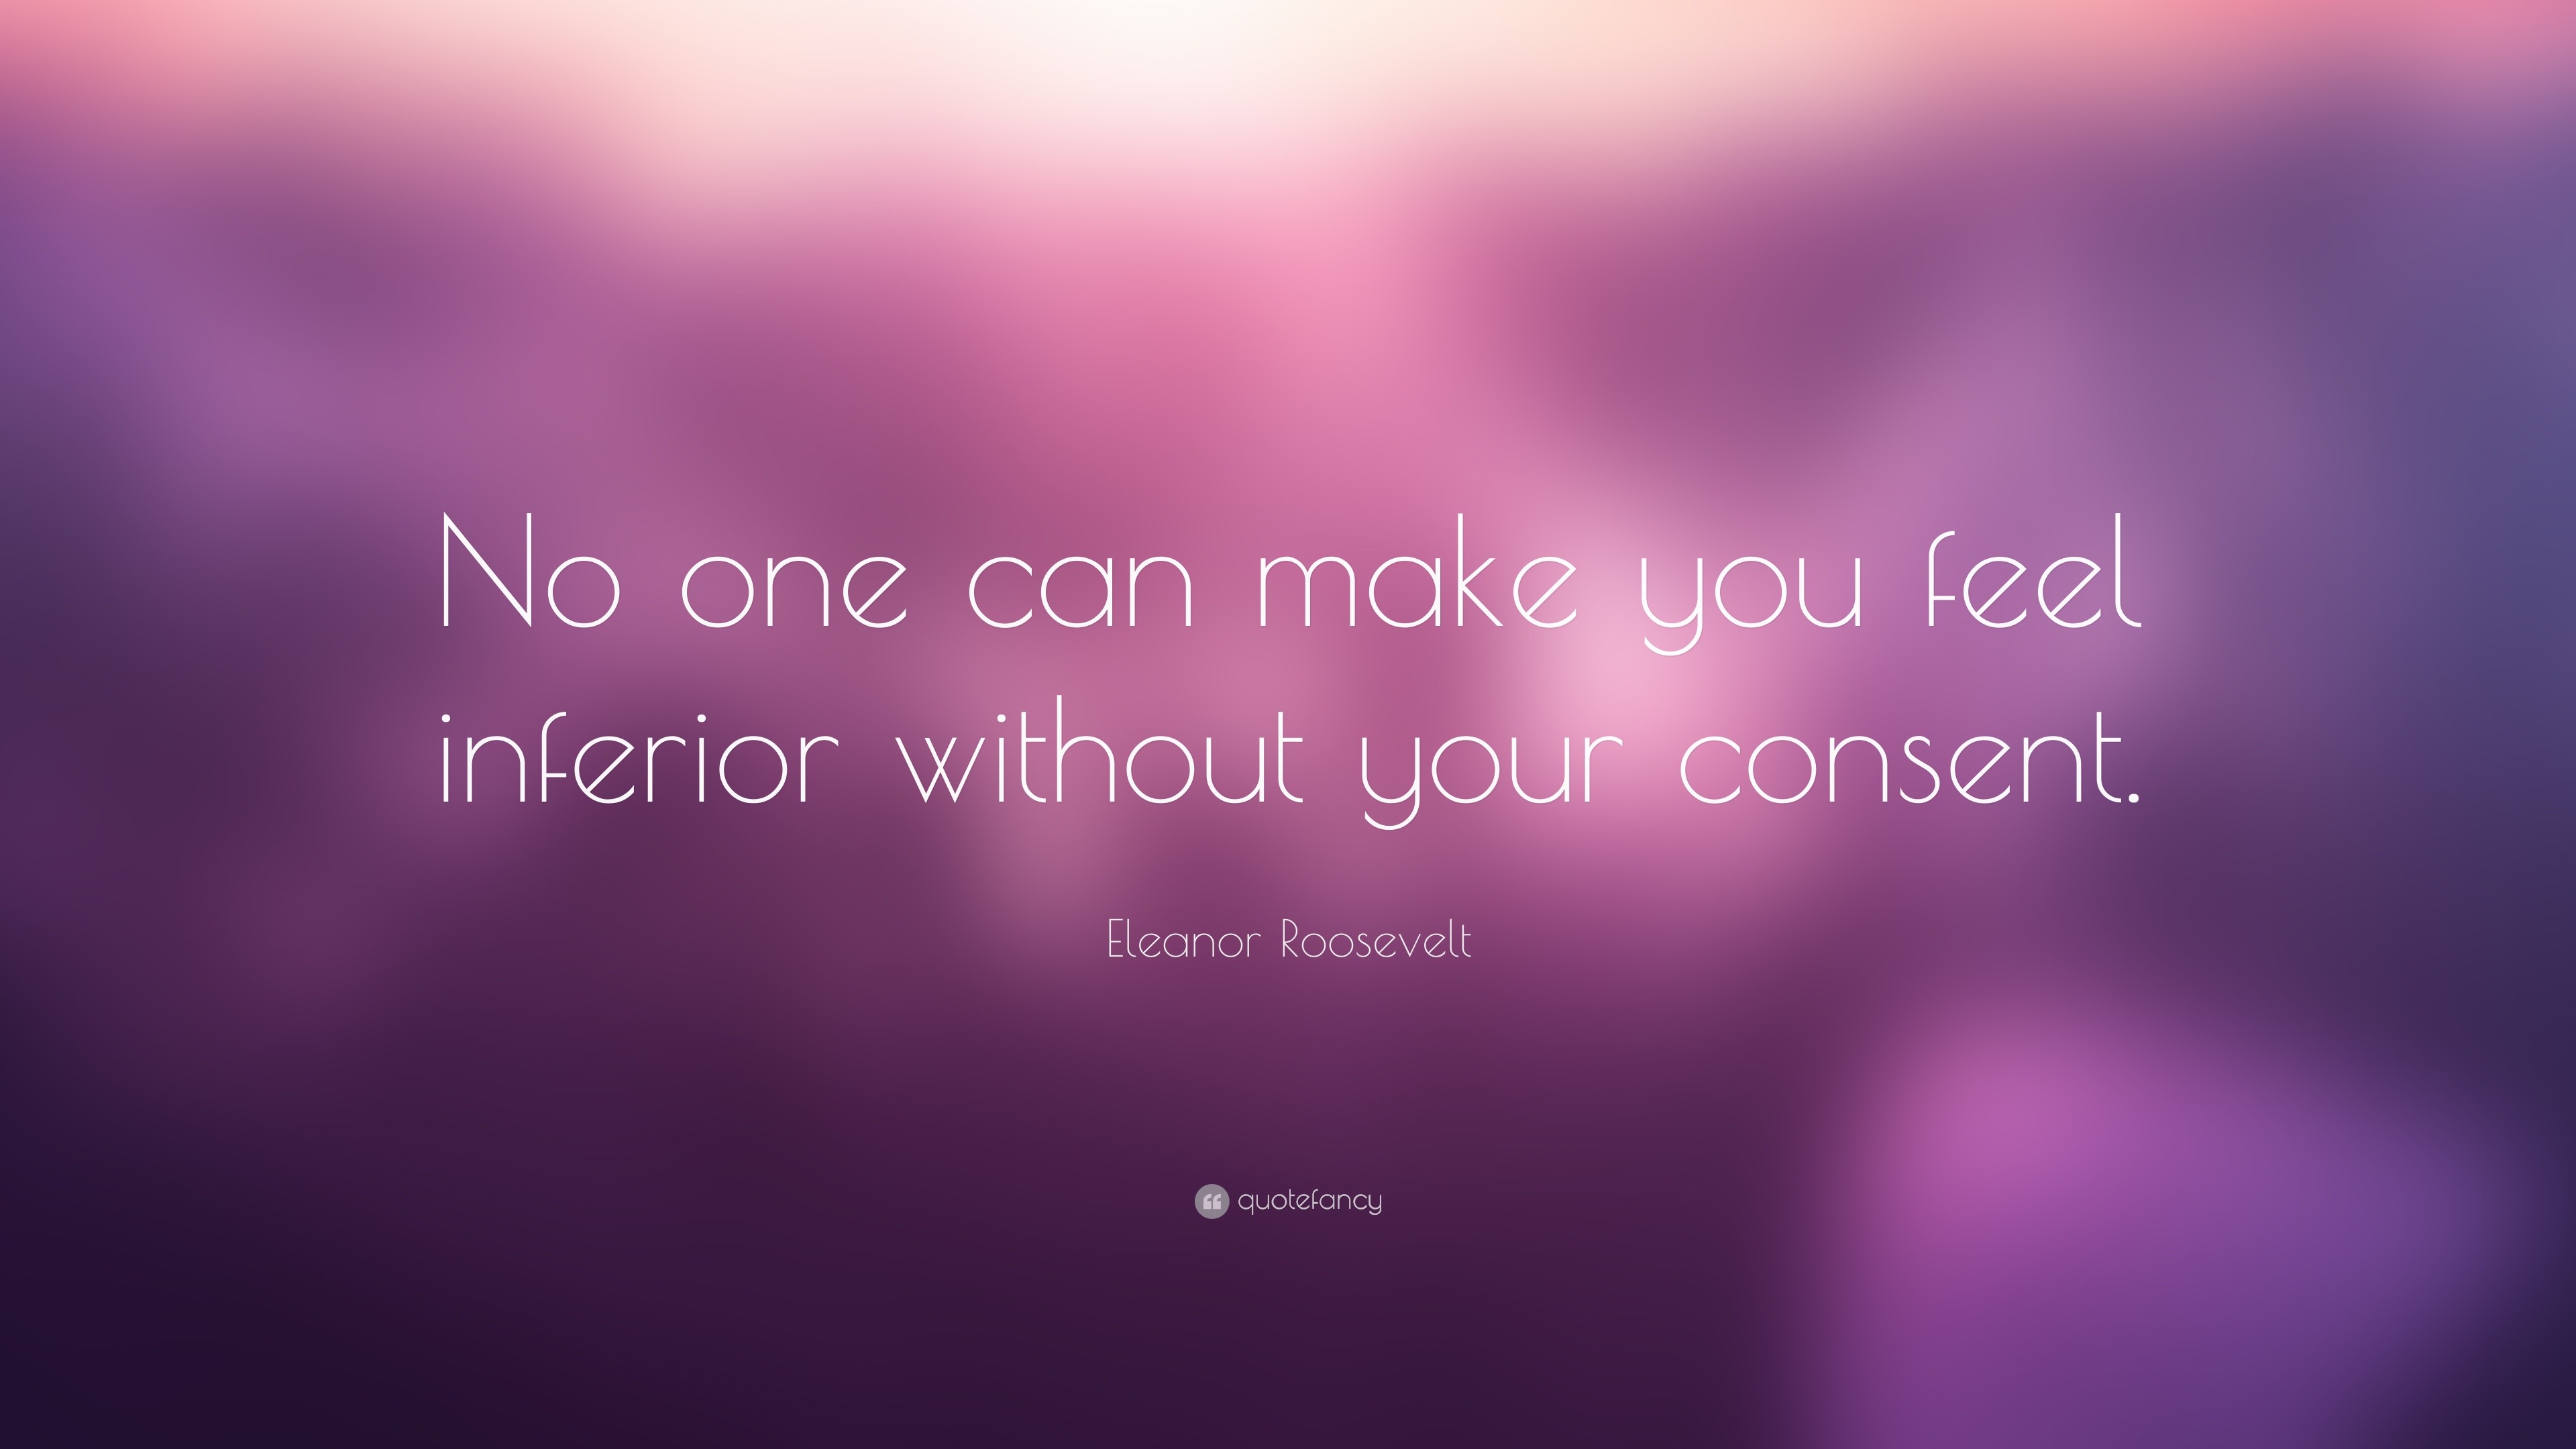 Eleanor Roosevelt Quote: “No one can make you feel inferior without